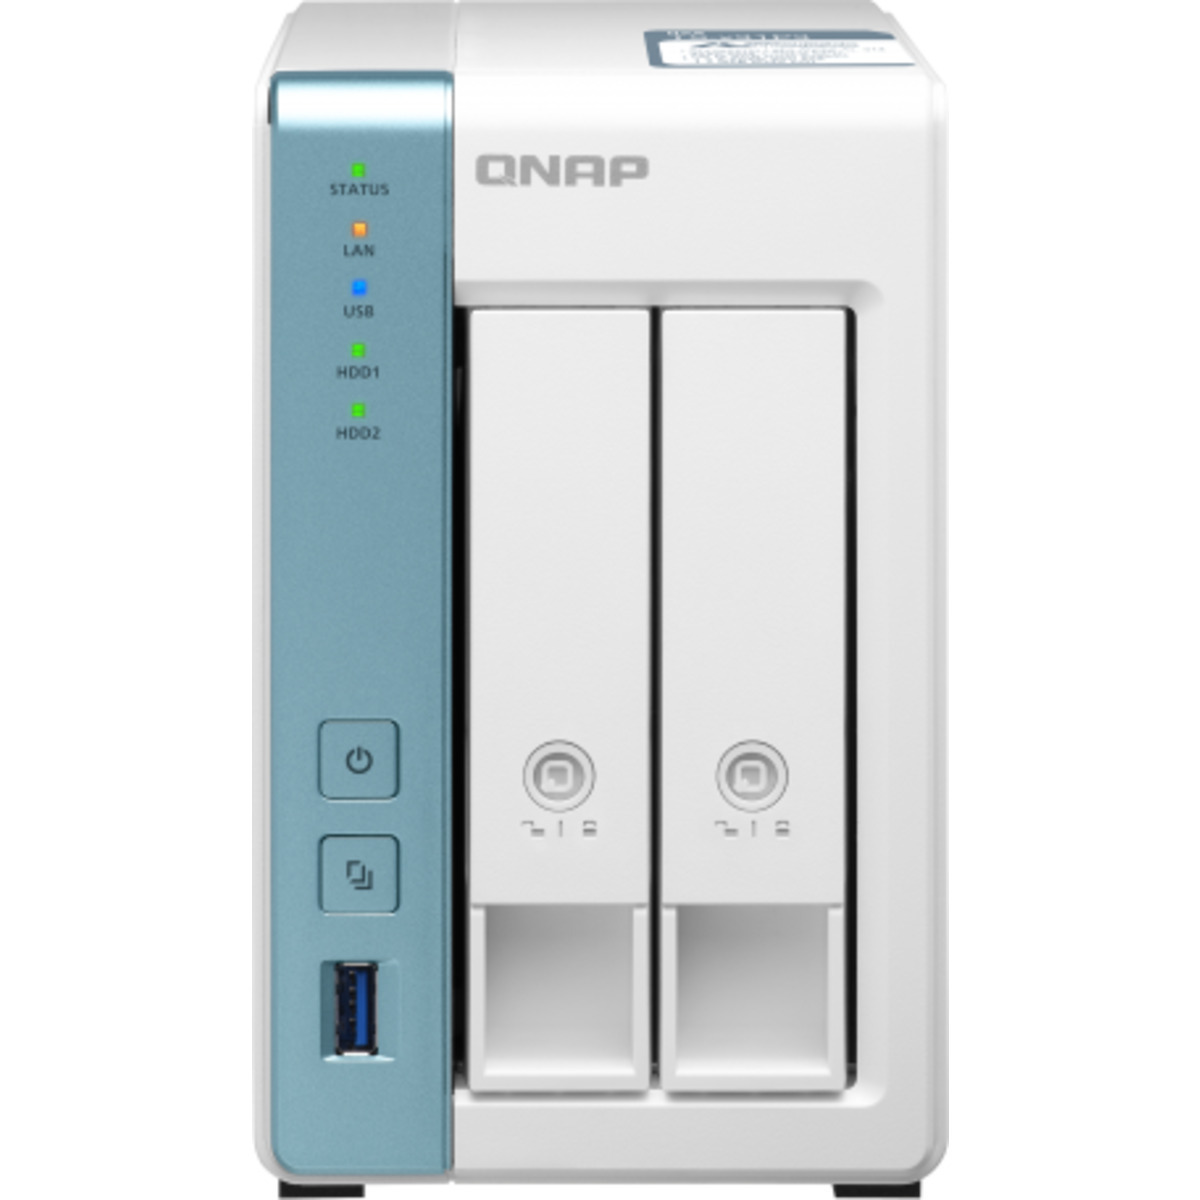 buy $614 QNAP TS-231P3 8tb Desktop NAS - Network Attached Storage Device 2x4000gb Western Digital Blue WD40EZRZ 3.5 5400rpm SATA 6Gb/s HDD CONSUMER Class Drives Installed - Burn-In Tested - FREE RAM UPGRADE - nas headquarters buy network attached storage server device das new raid-5 free shipping usa christmas new year holiday sale TS-231P3